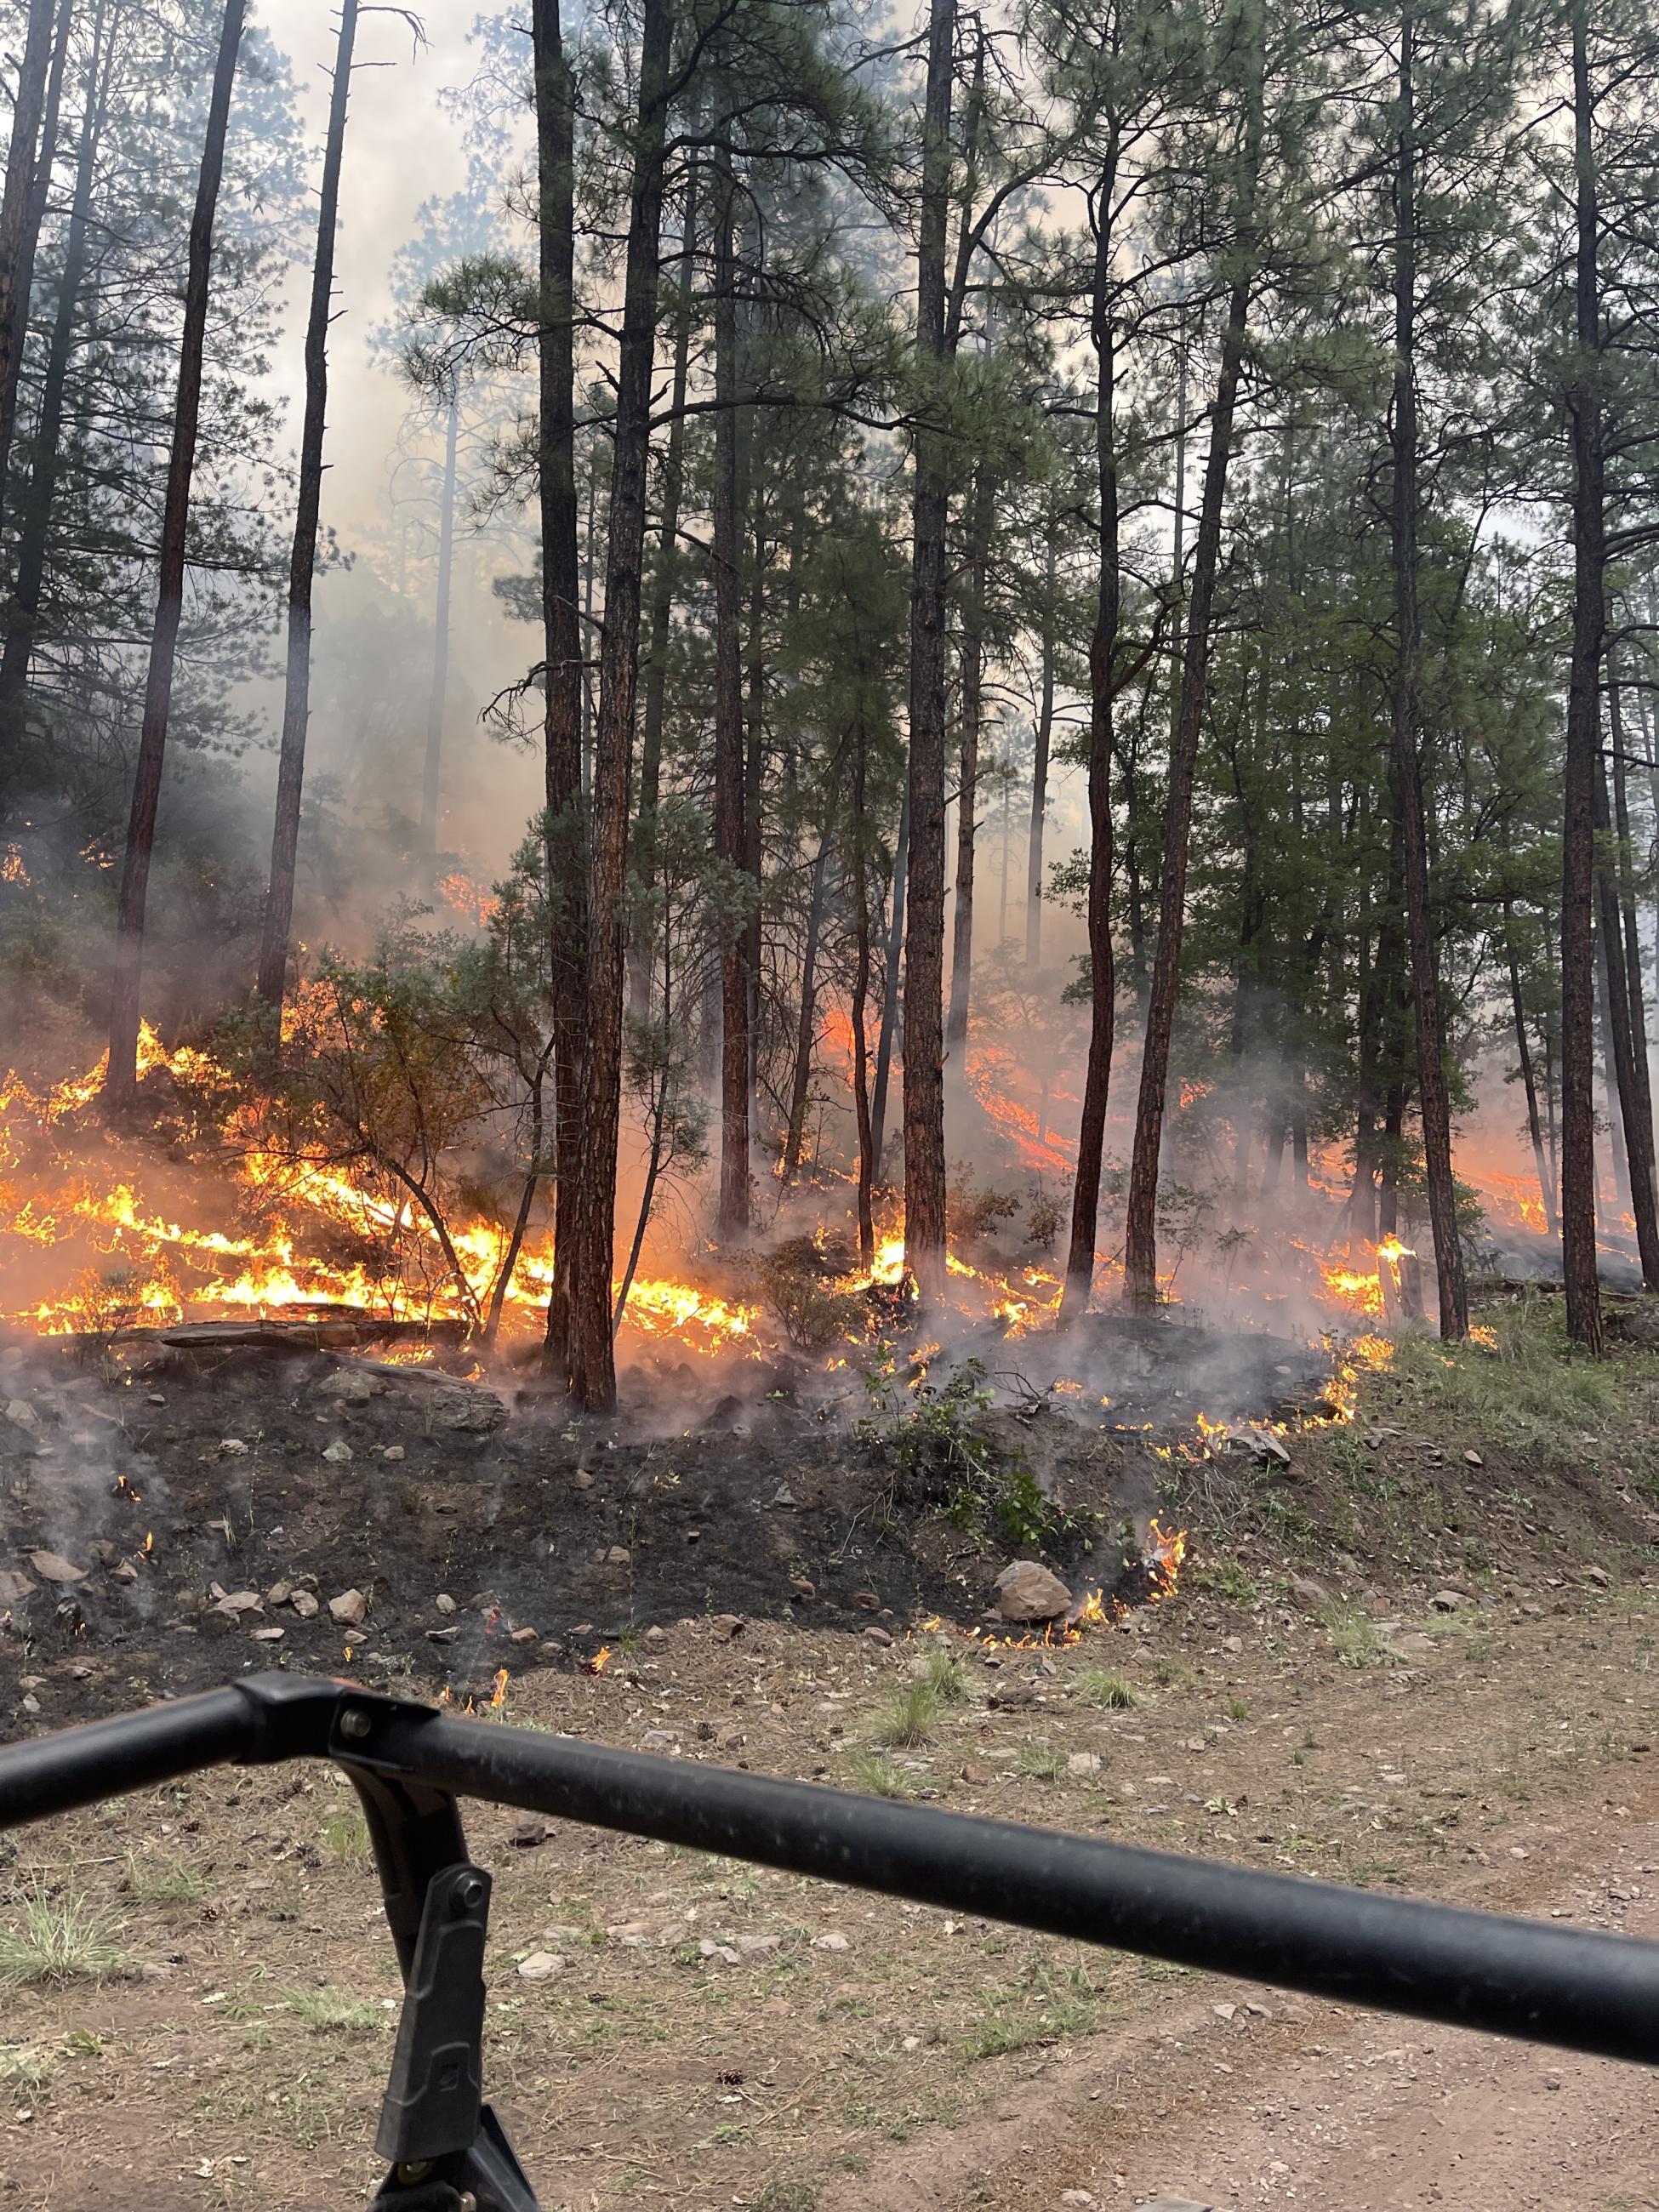 Picture is of active fire burning on the surface in a ponderosa pine forest in the Buckhorn Fire.  